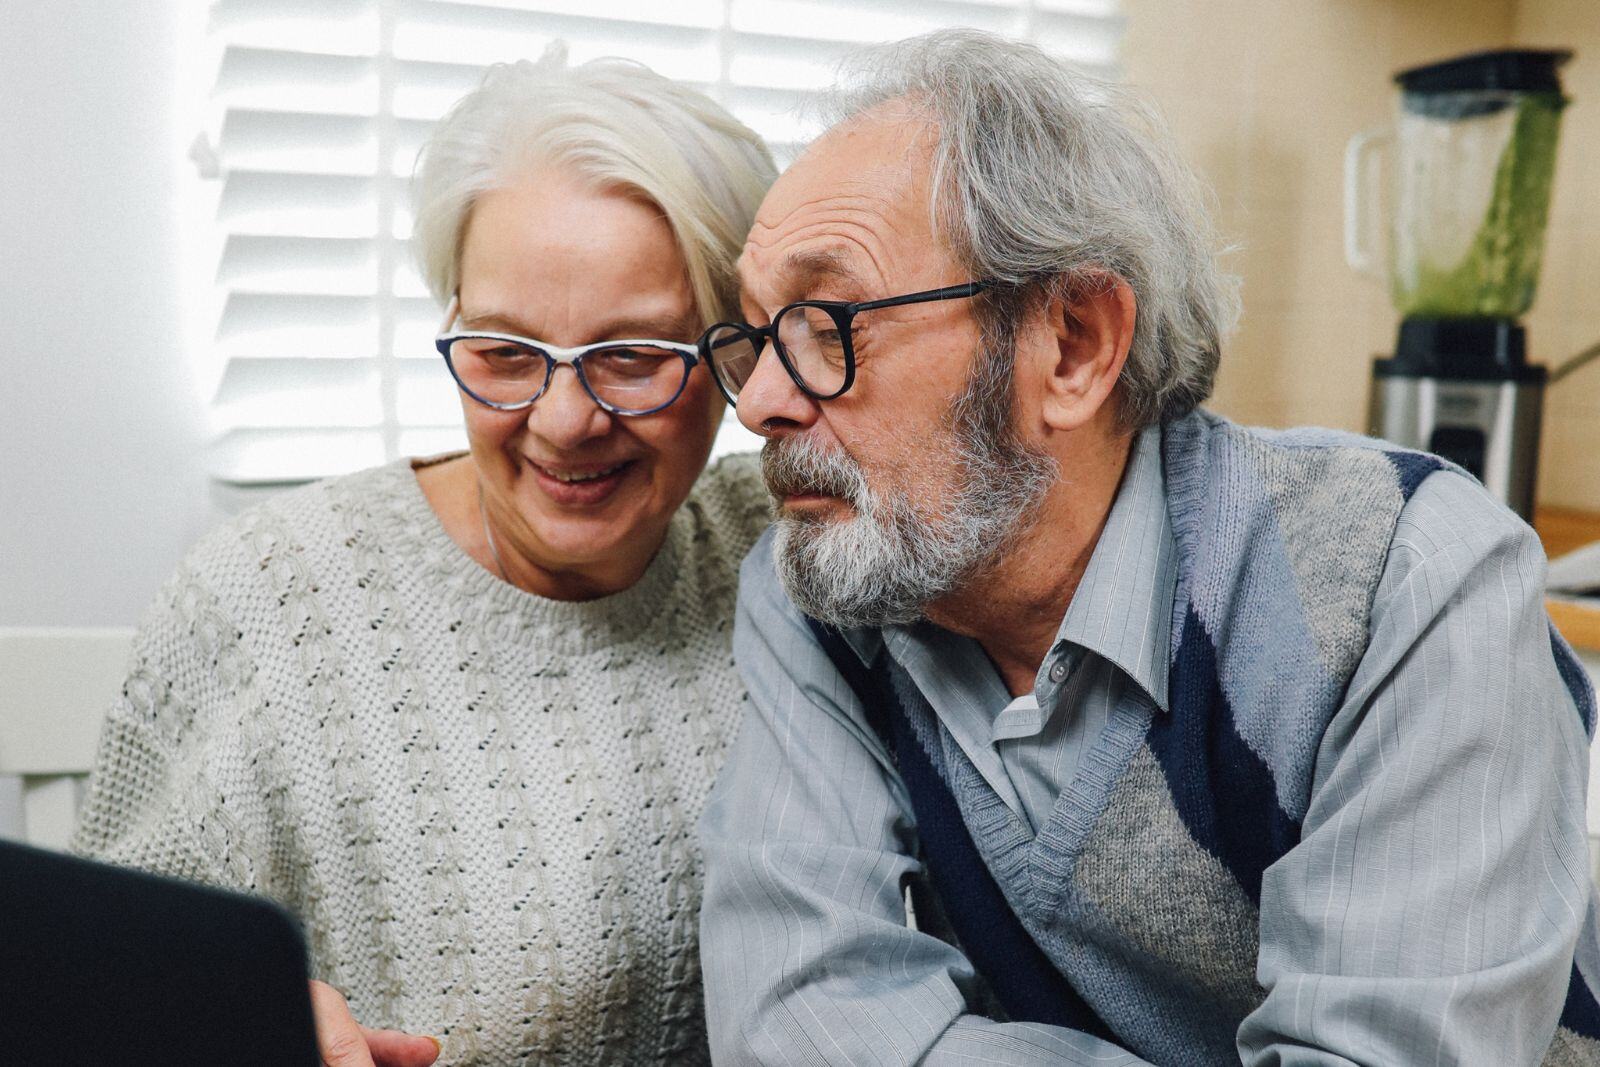 An older adult couple look together at a screen, researching their options.